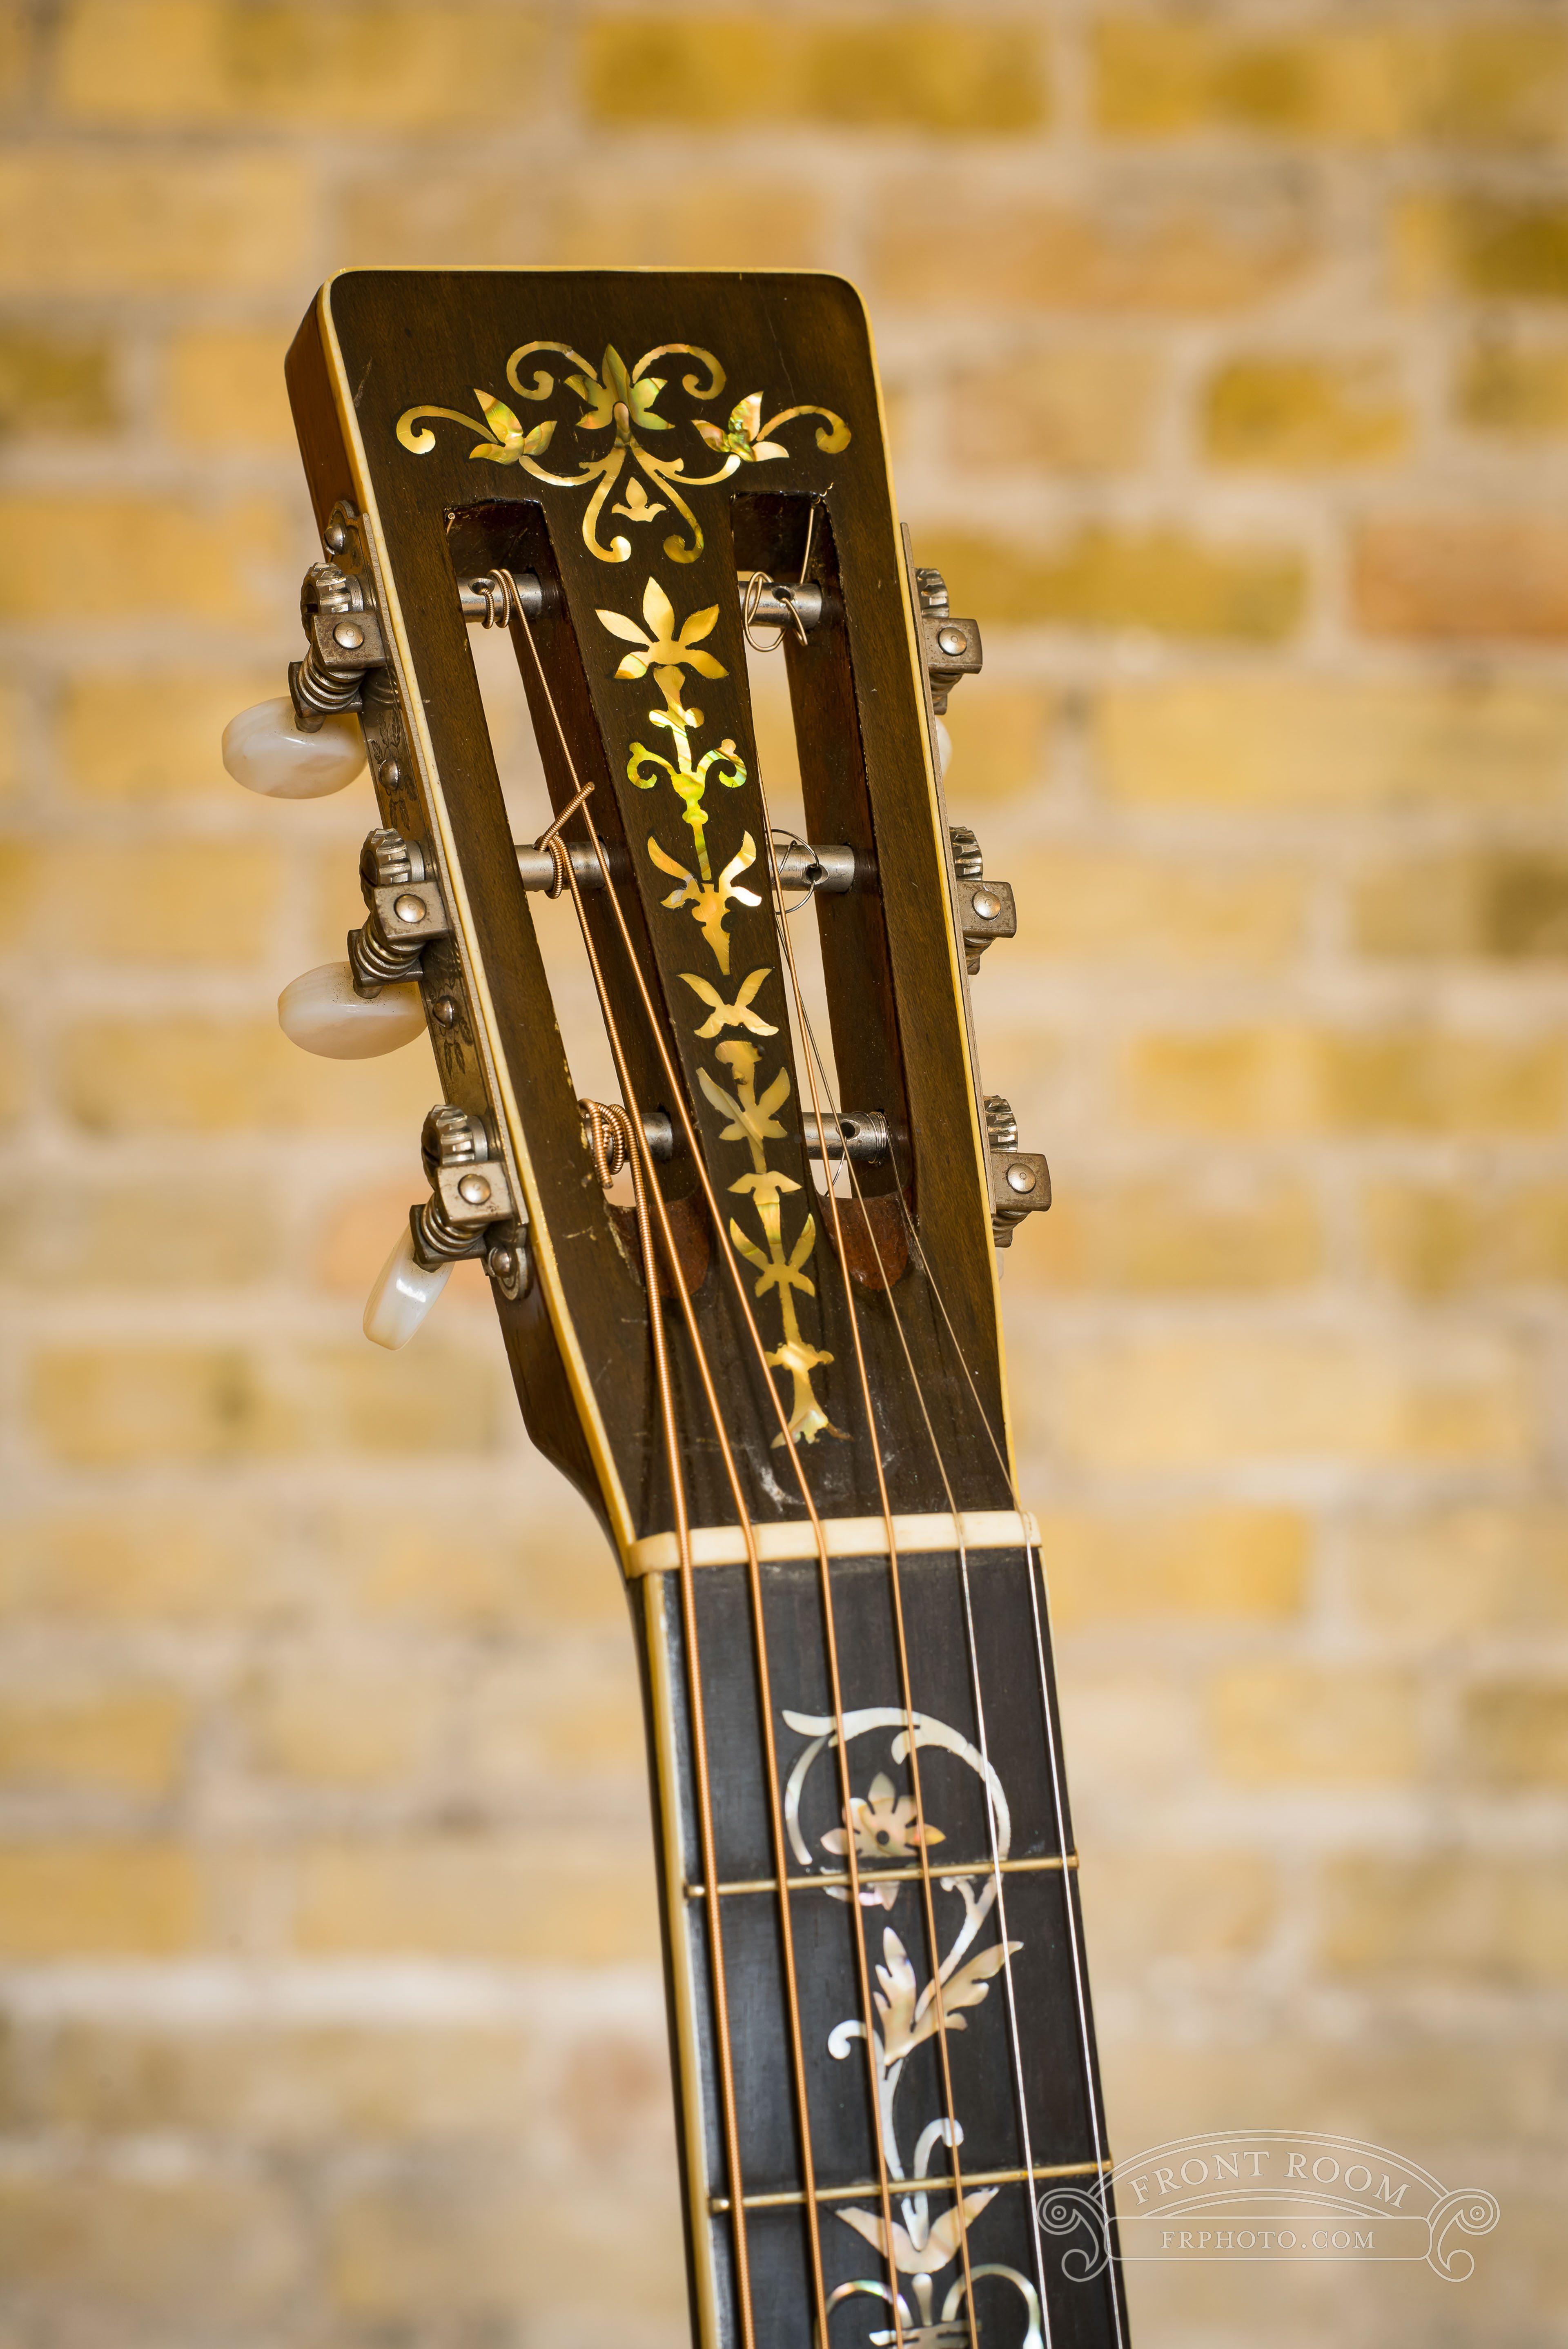 Guitar Product Photography – A Beautiful Model!